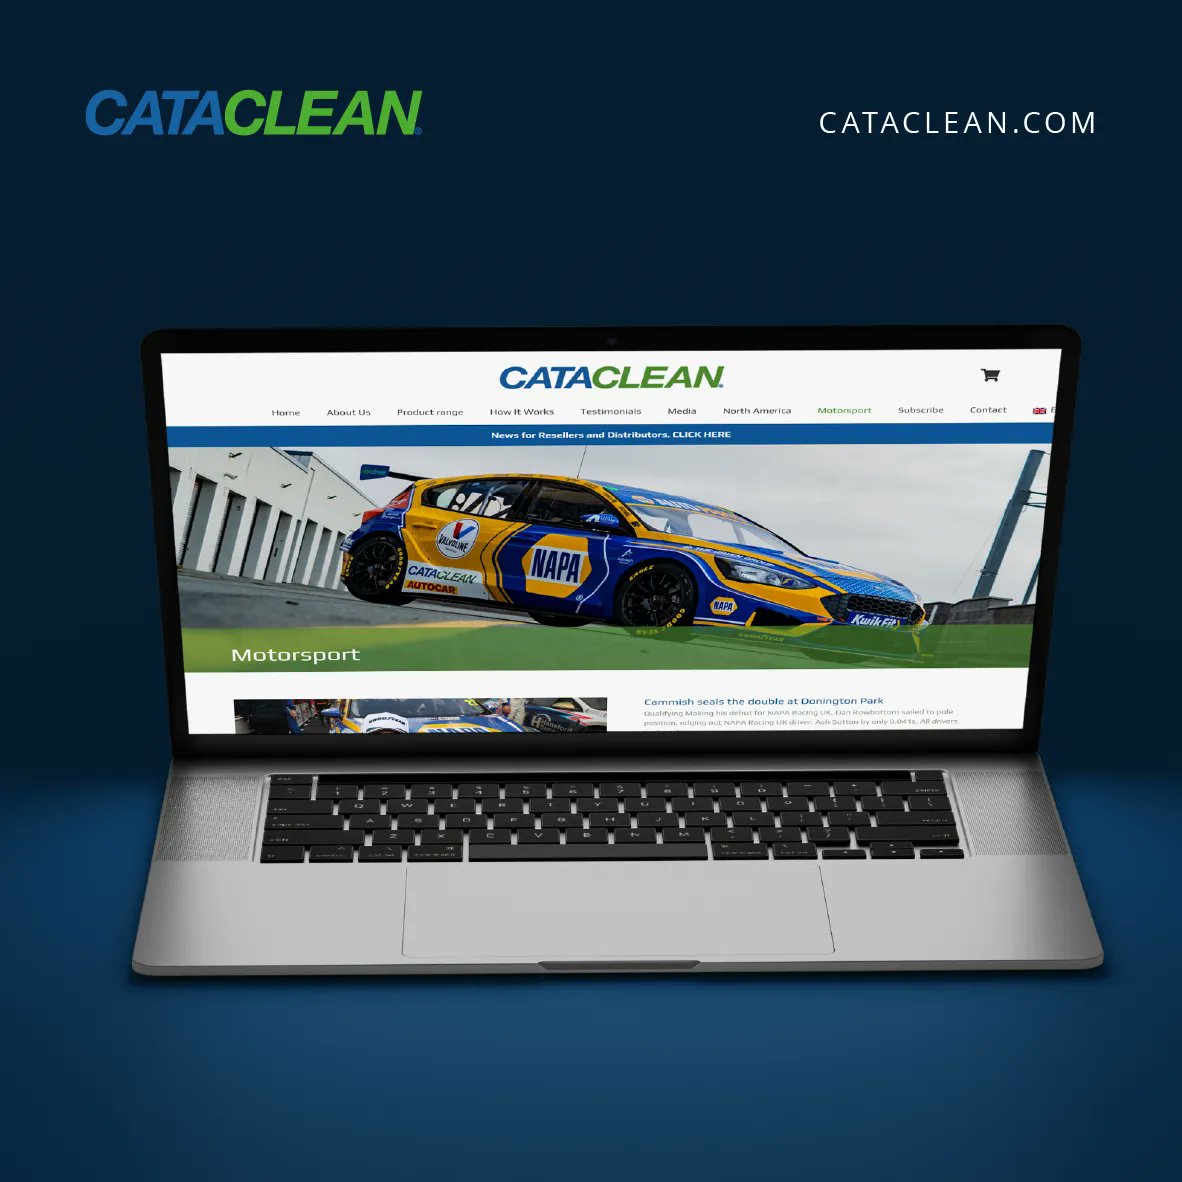 🖥️ Stay up to date with all the latest motorsport news this season, visit our blog at cataclean.com/motorsport  

#Cataclean #motorsport #Napa #NAPARacingUK #touringcars @naparacinguk #emissions #EngineCleaning #FuelAdditive #MOT #NCT #MPG #enginesystem #catalyticconverter